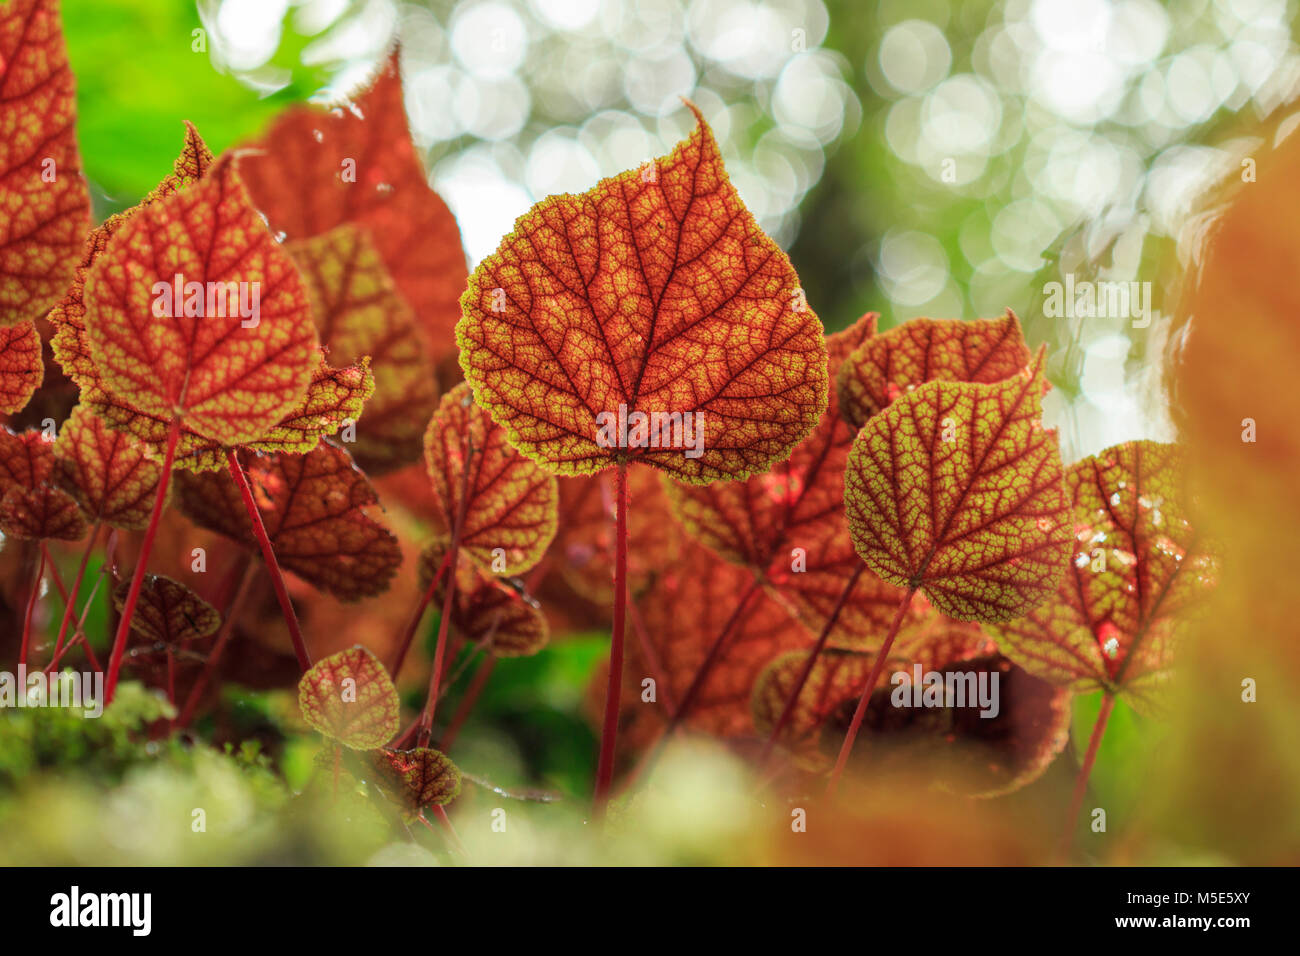 Leaves of Begonia with green and red color, Bokeh on backgrounds. Stock Photo